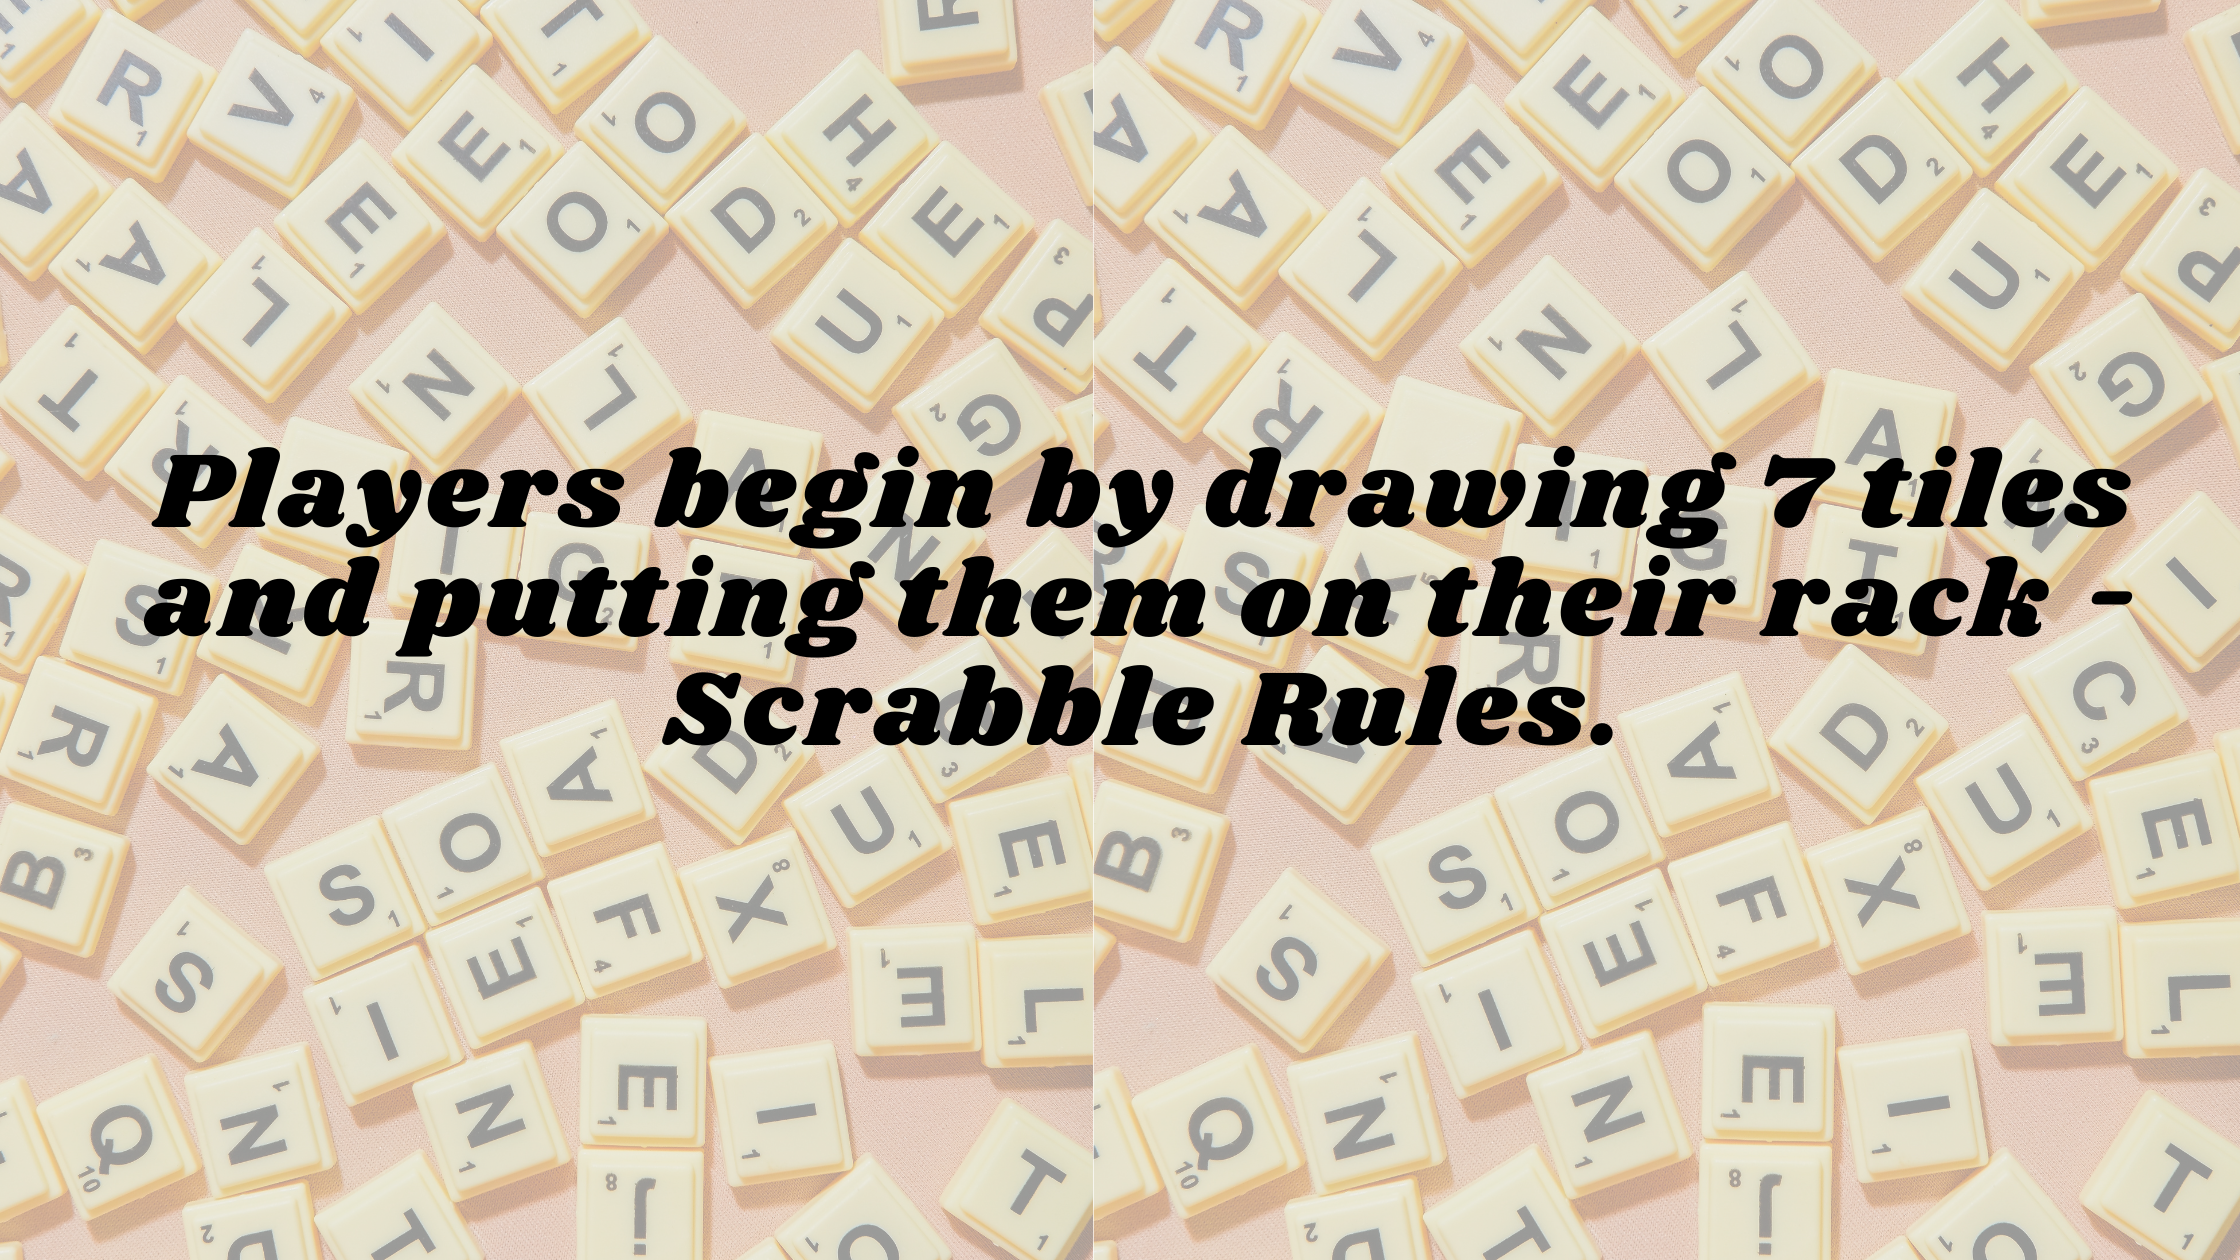 Players begin by drawing 7 tiles and put them on their rack - Scrabble Rules.